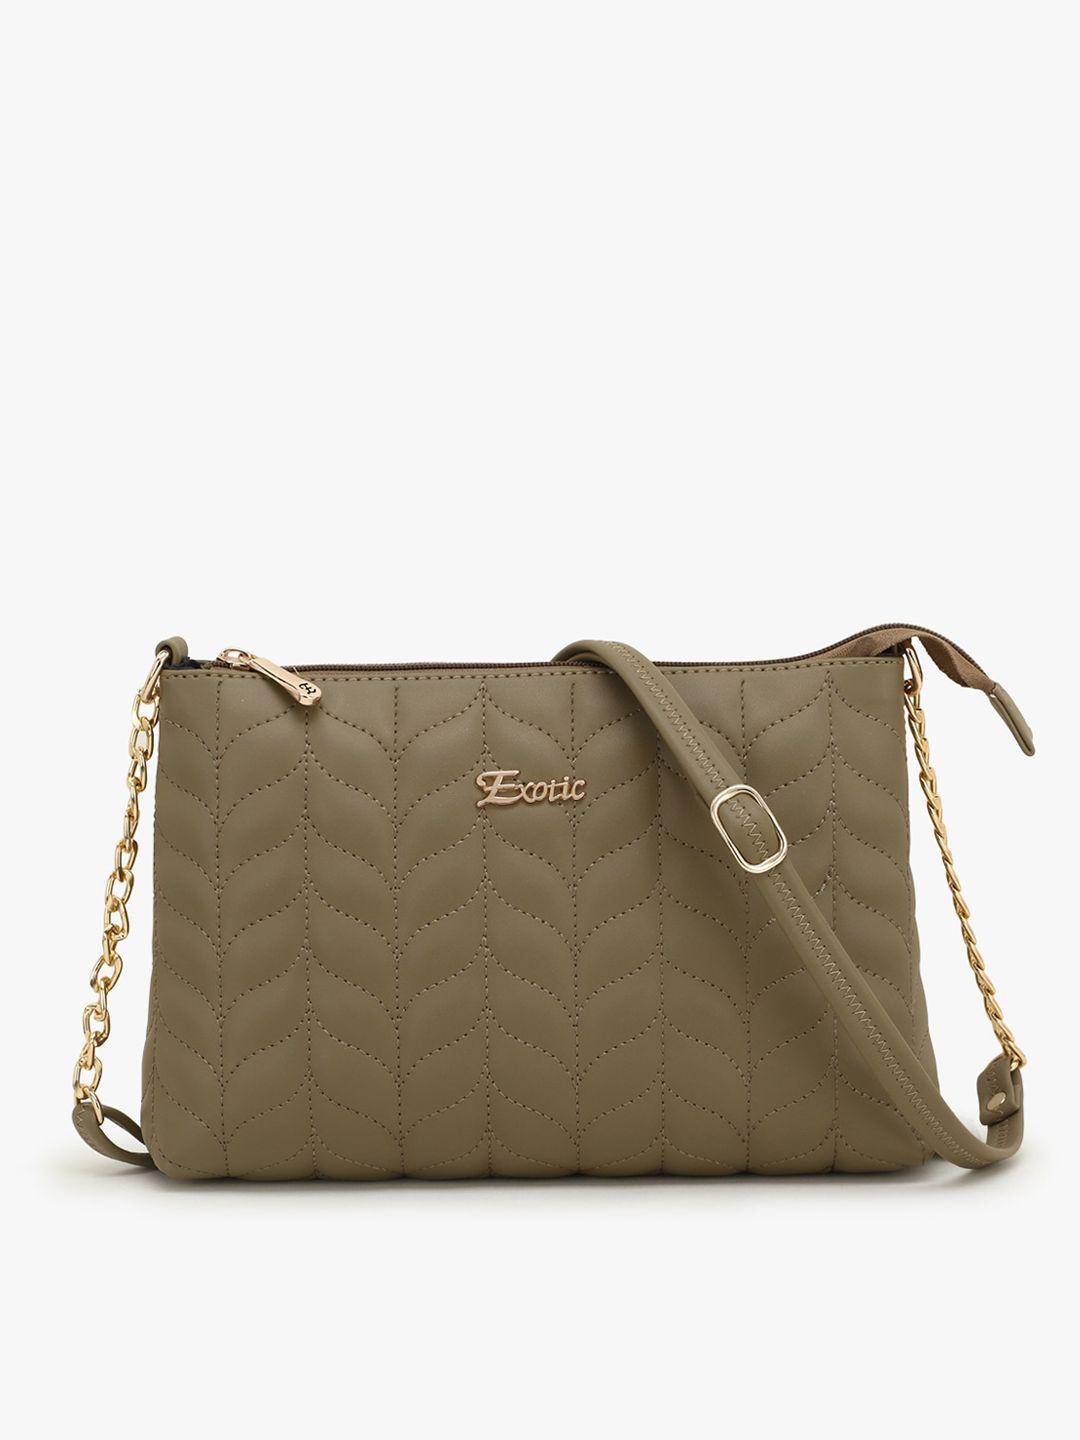 exotic olive green geometric textured pu structured sling bag with quilted